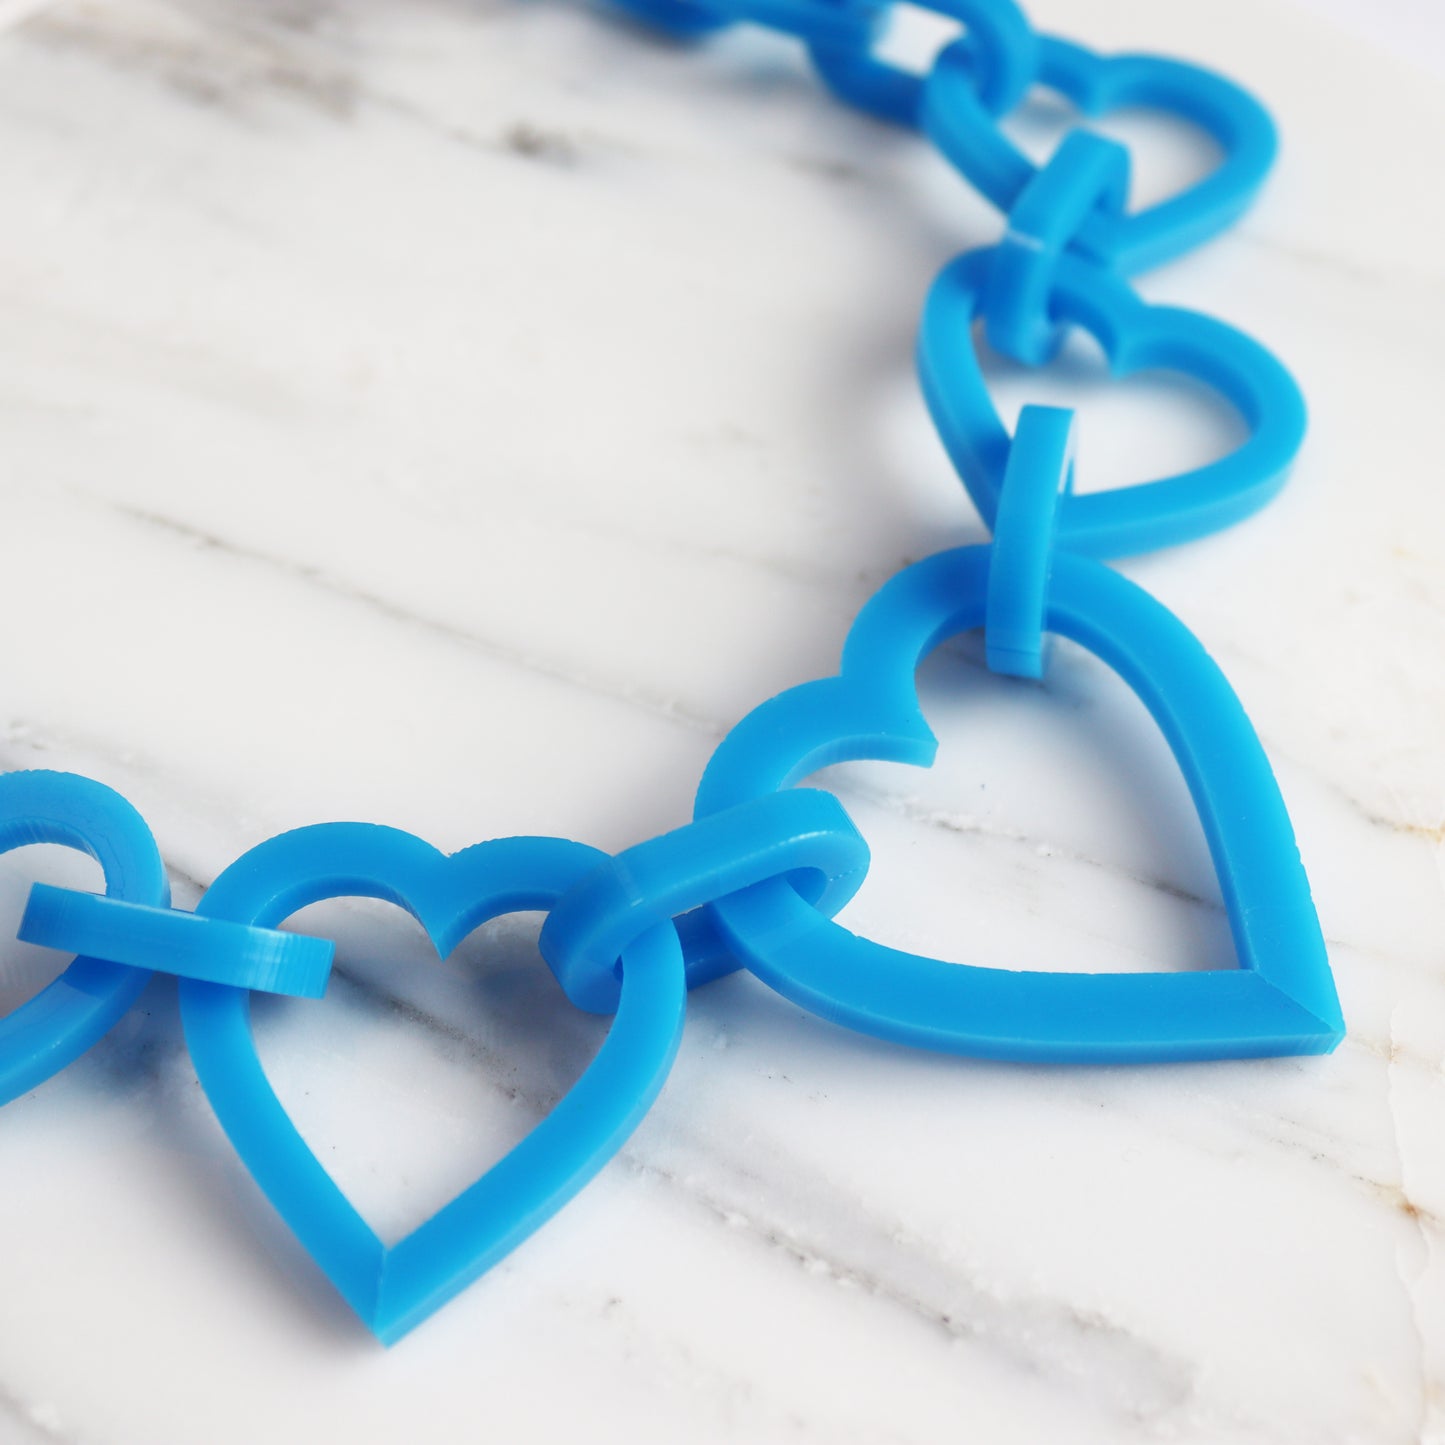 blue statement heart acrylci necklace close up shown on marble background